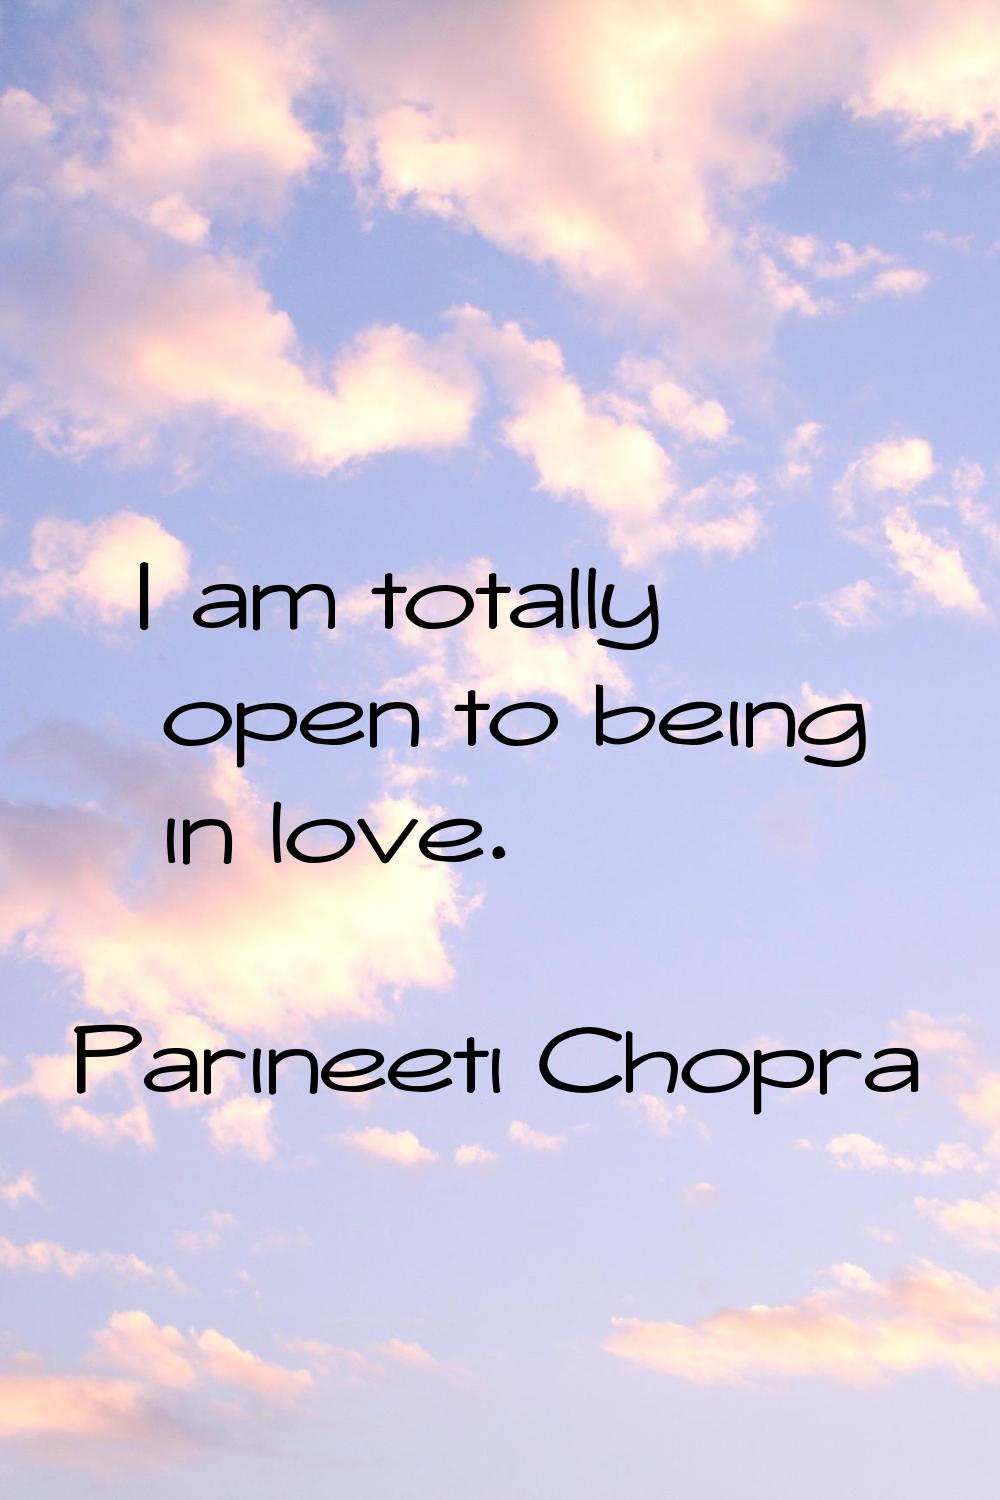 I am totally open to being in love.